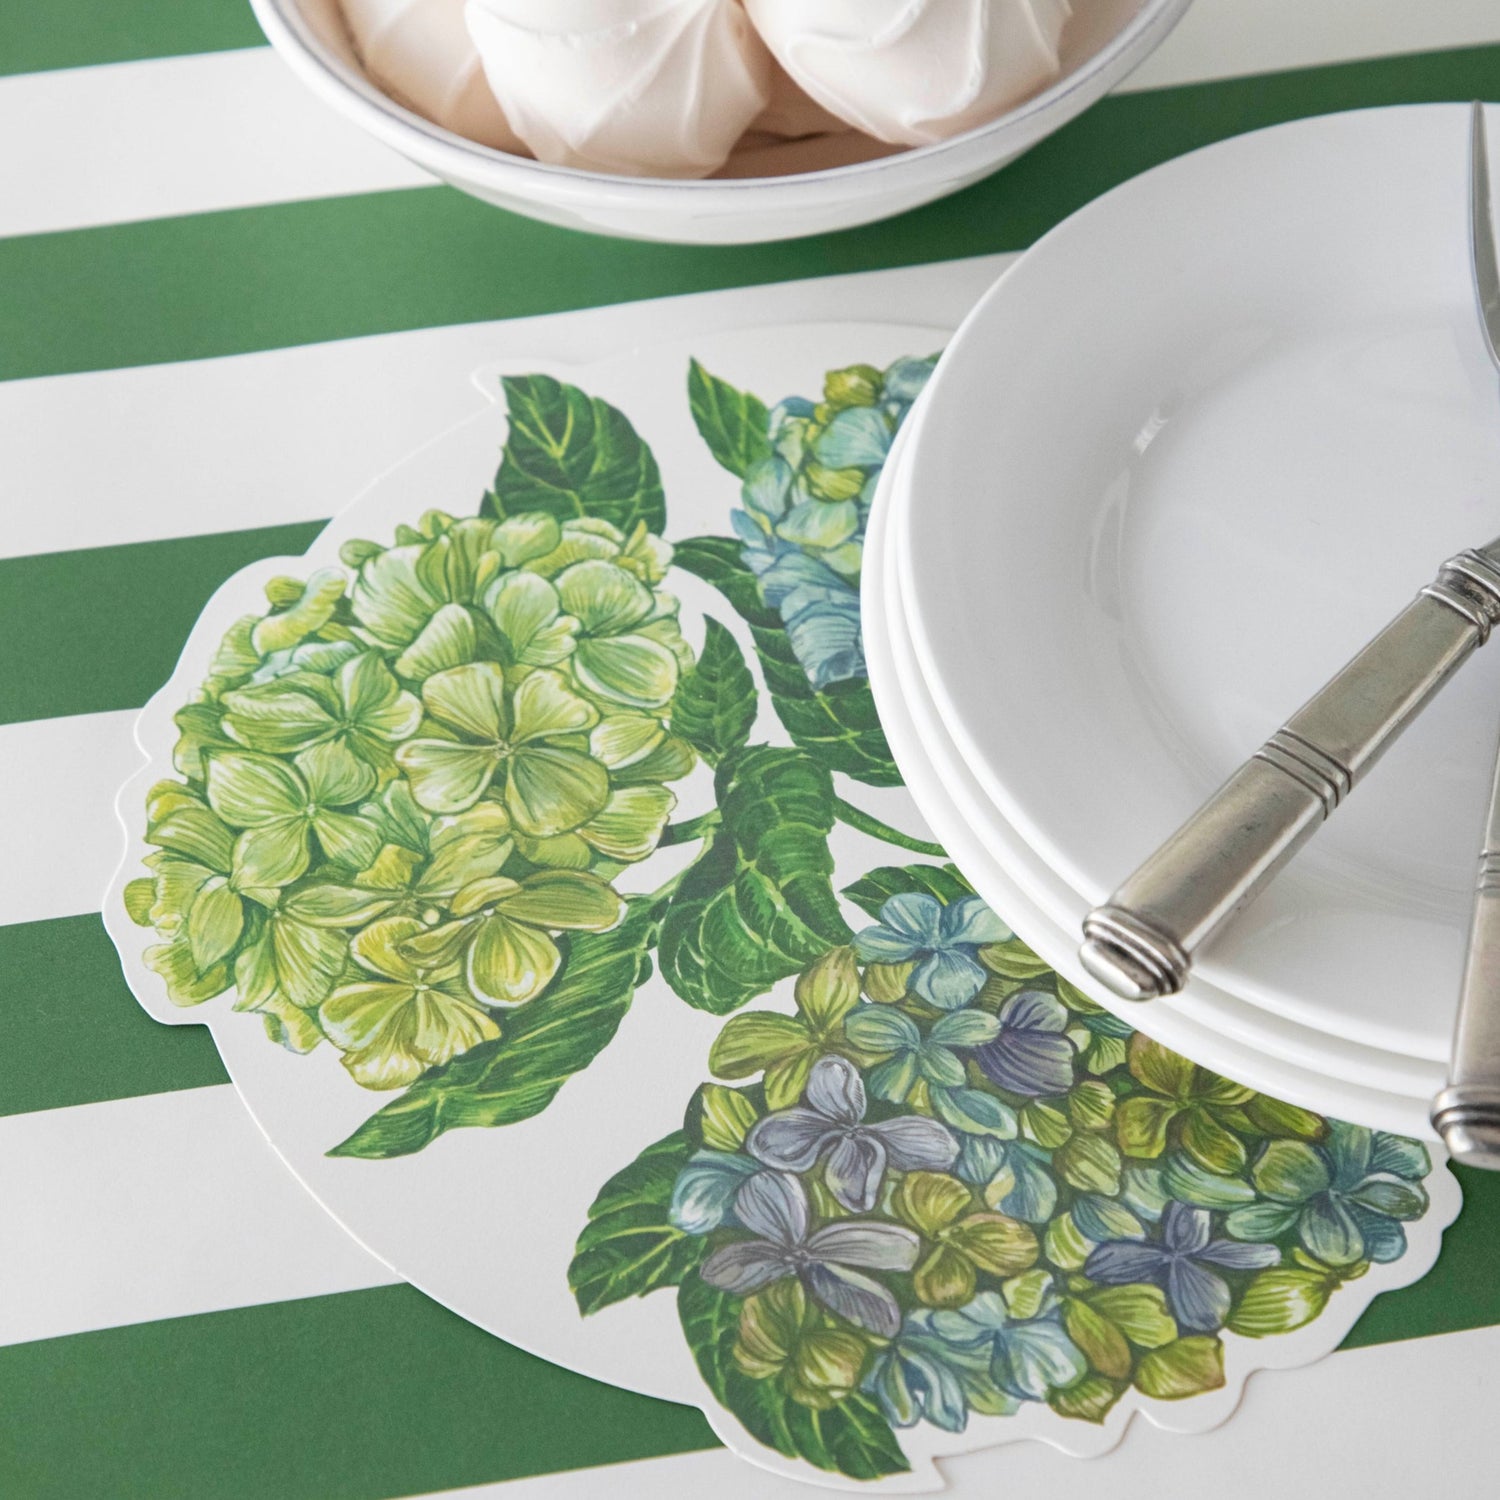 A Hydrangea Serving Paper tucked under the plate of an elegant place setting.